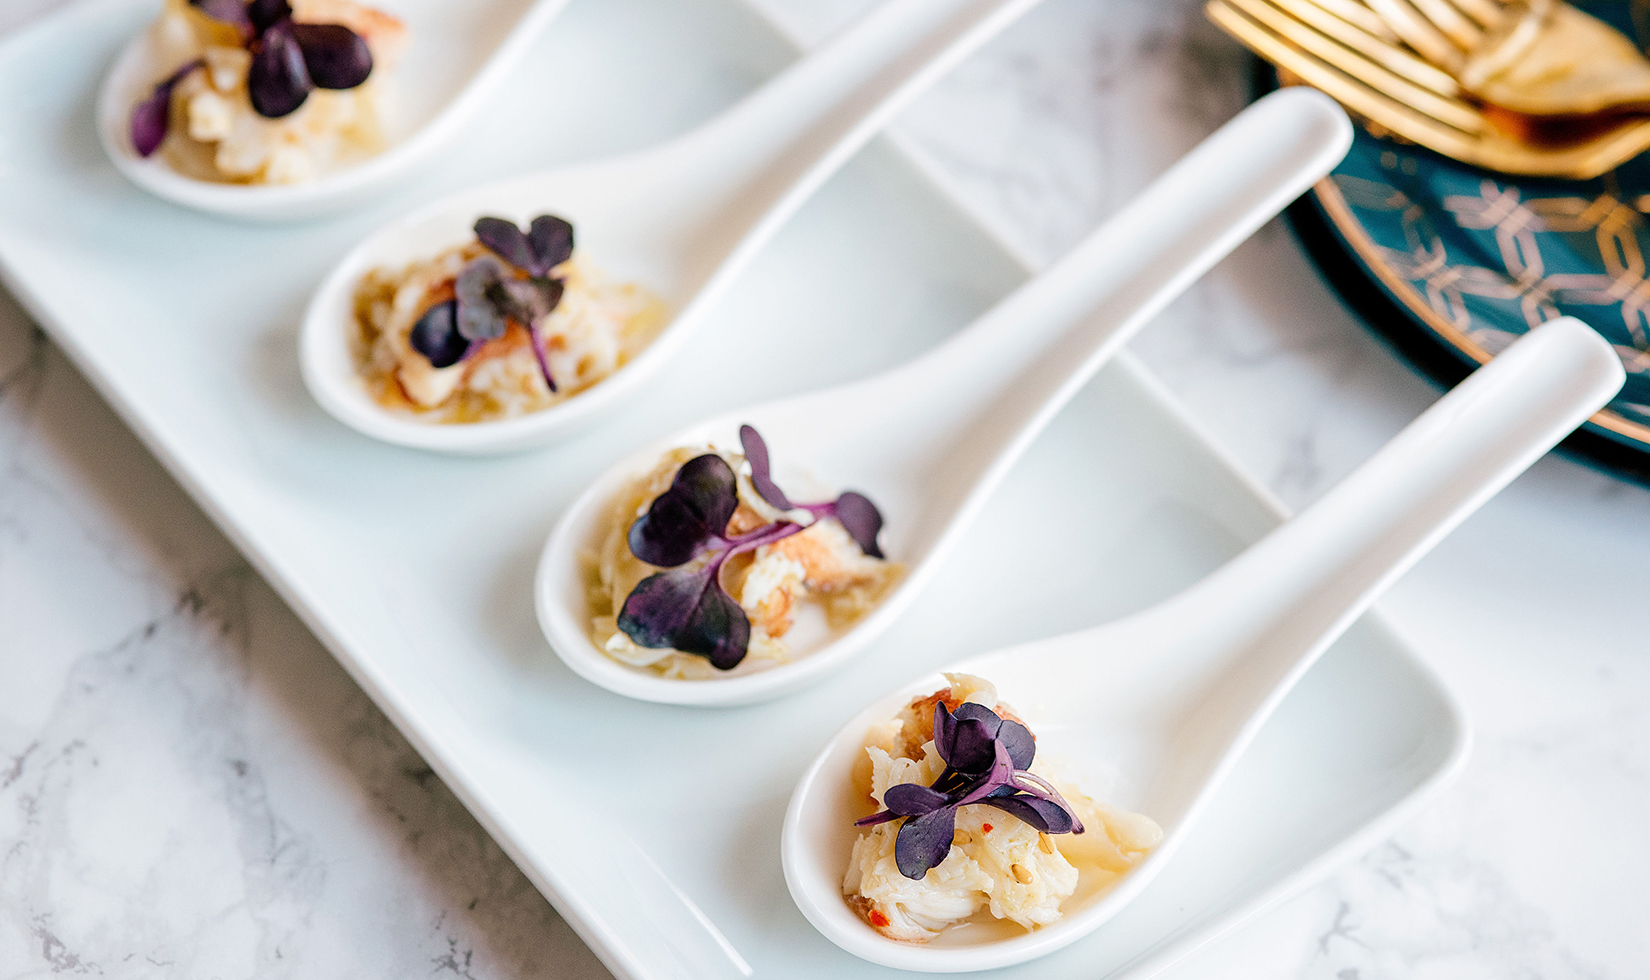 Dungeness crab cocktail with miso vinaigrette on spoons